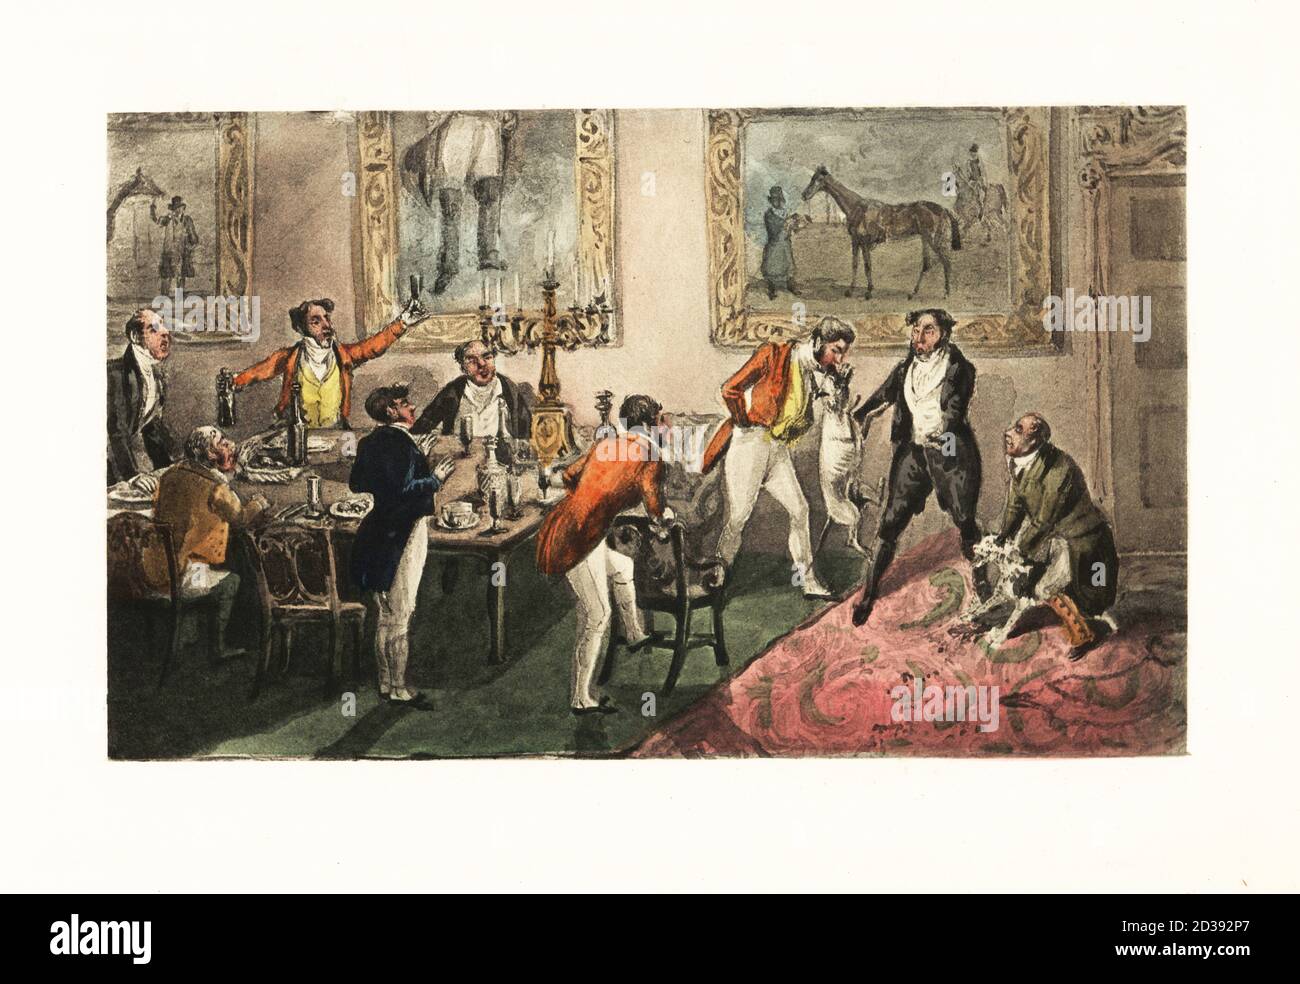 Drunken gentleman lifting a dog by its nose to stop a dog fight getting bloody. Blood sport between a Spanish bulldog and a mastiff in the dining room of Halston House. Blood and the bulldog. Chromolithographic facsimile of an illustration by Henry Thomas Alken from Memoirs of the Life of the Late John Mytton by Nimrod aka Charles James Apperley, Kegan Paul, London, 1900. Stock Photo